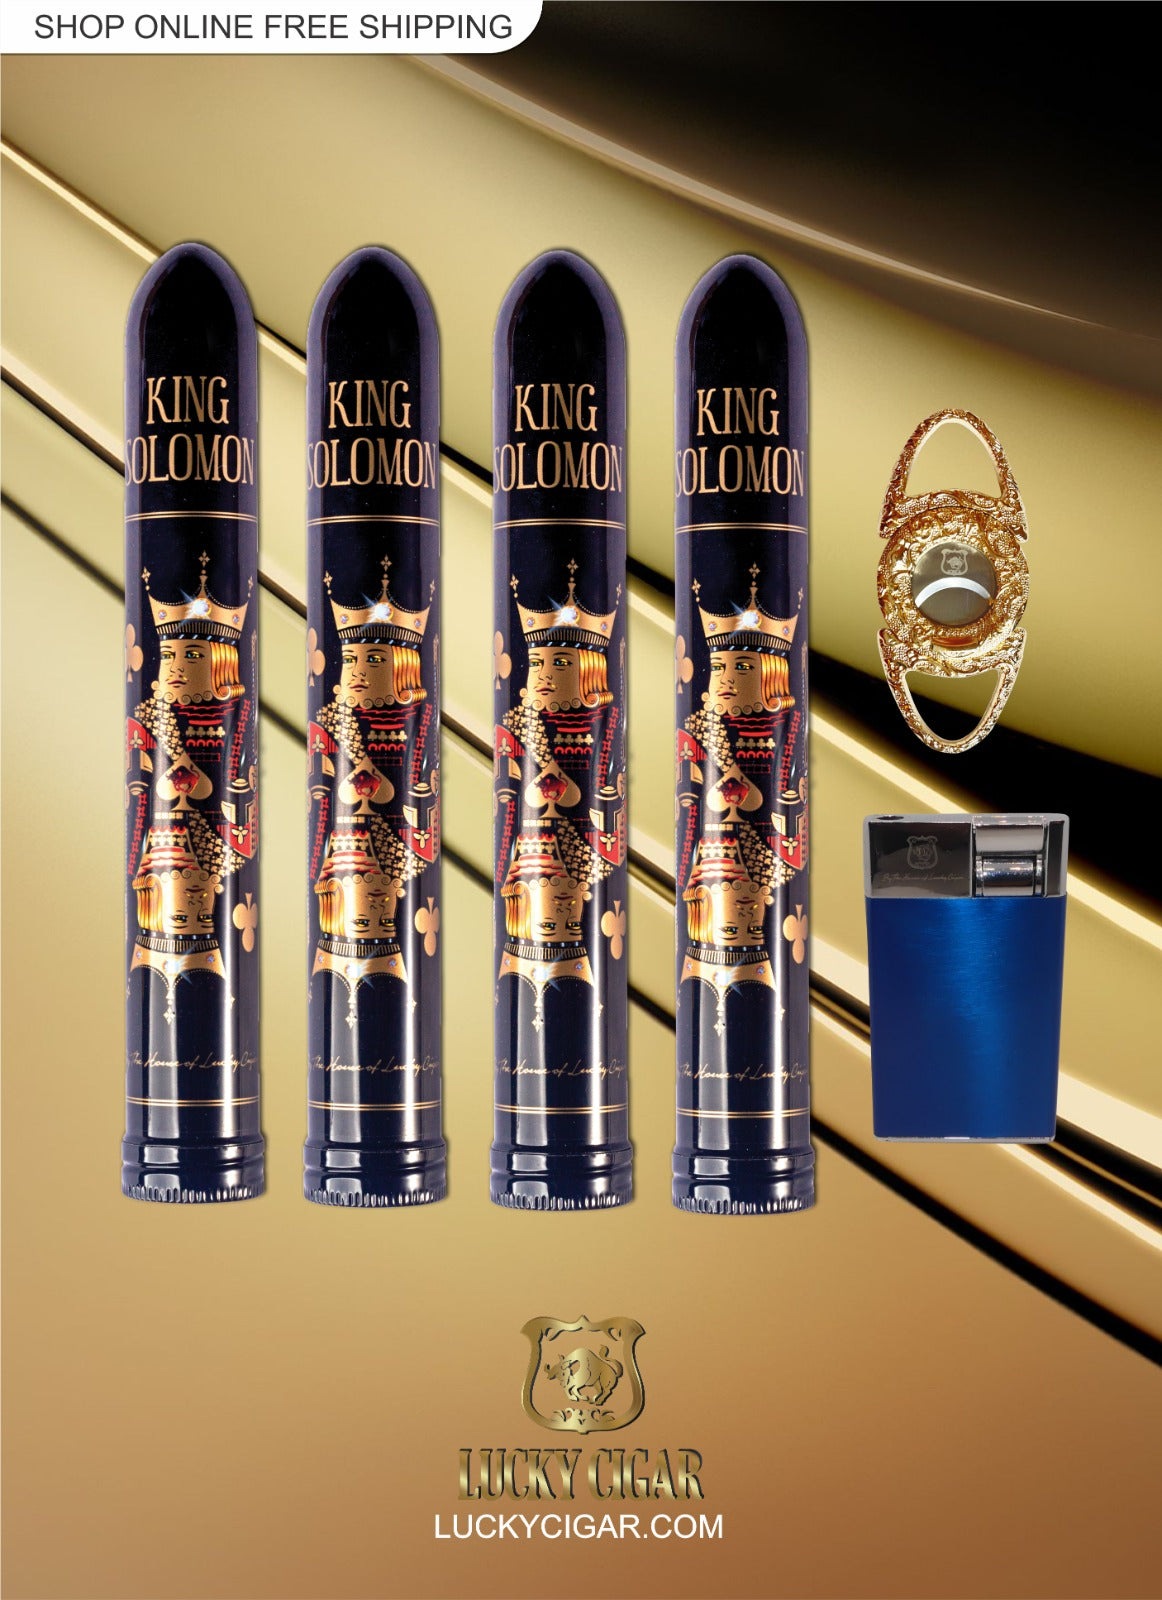 Lucky Cigar Sampler Sets: Set of 4 King Solomon Cigars with Cutter, Torch